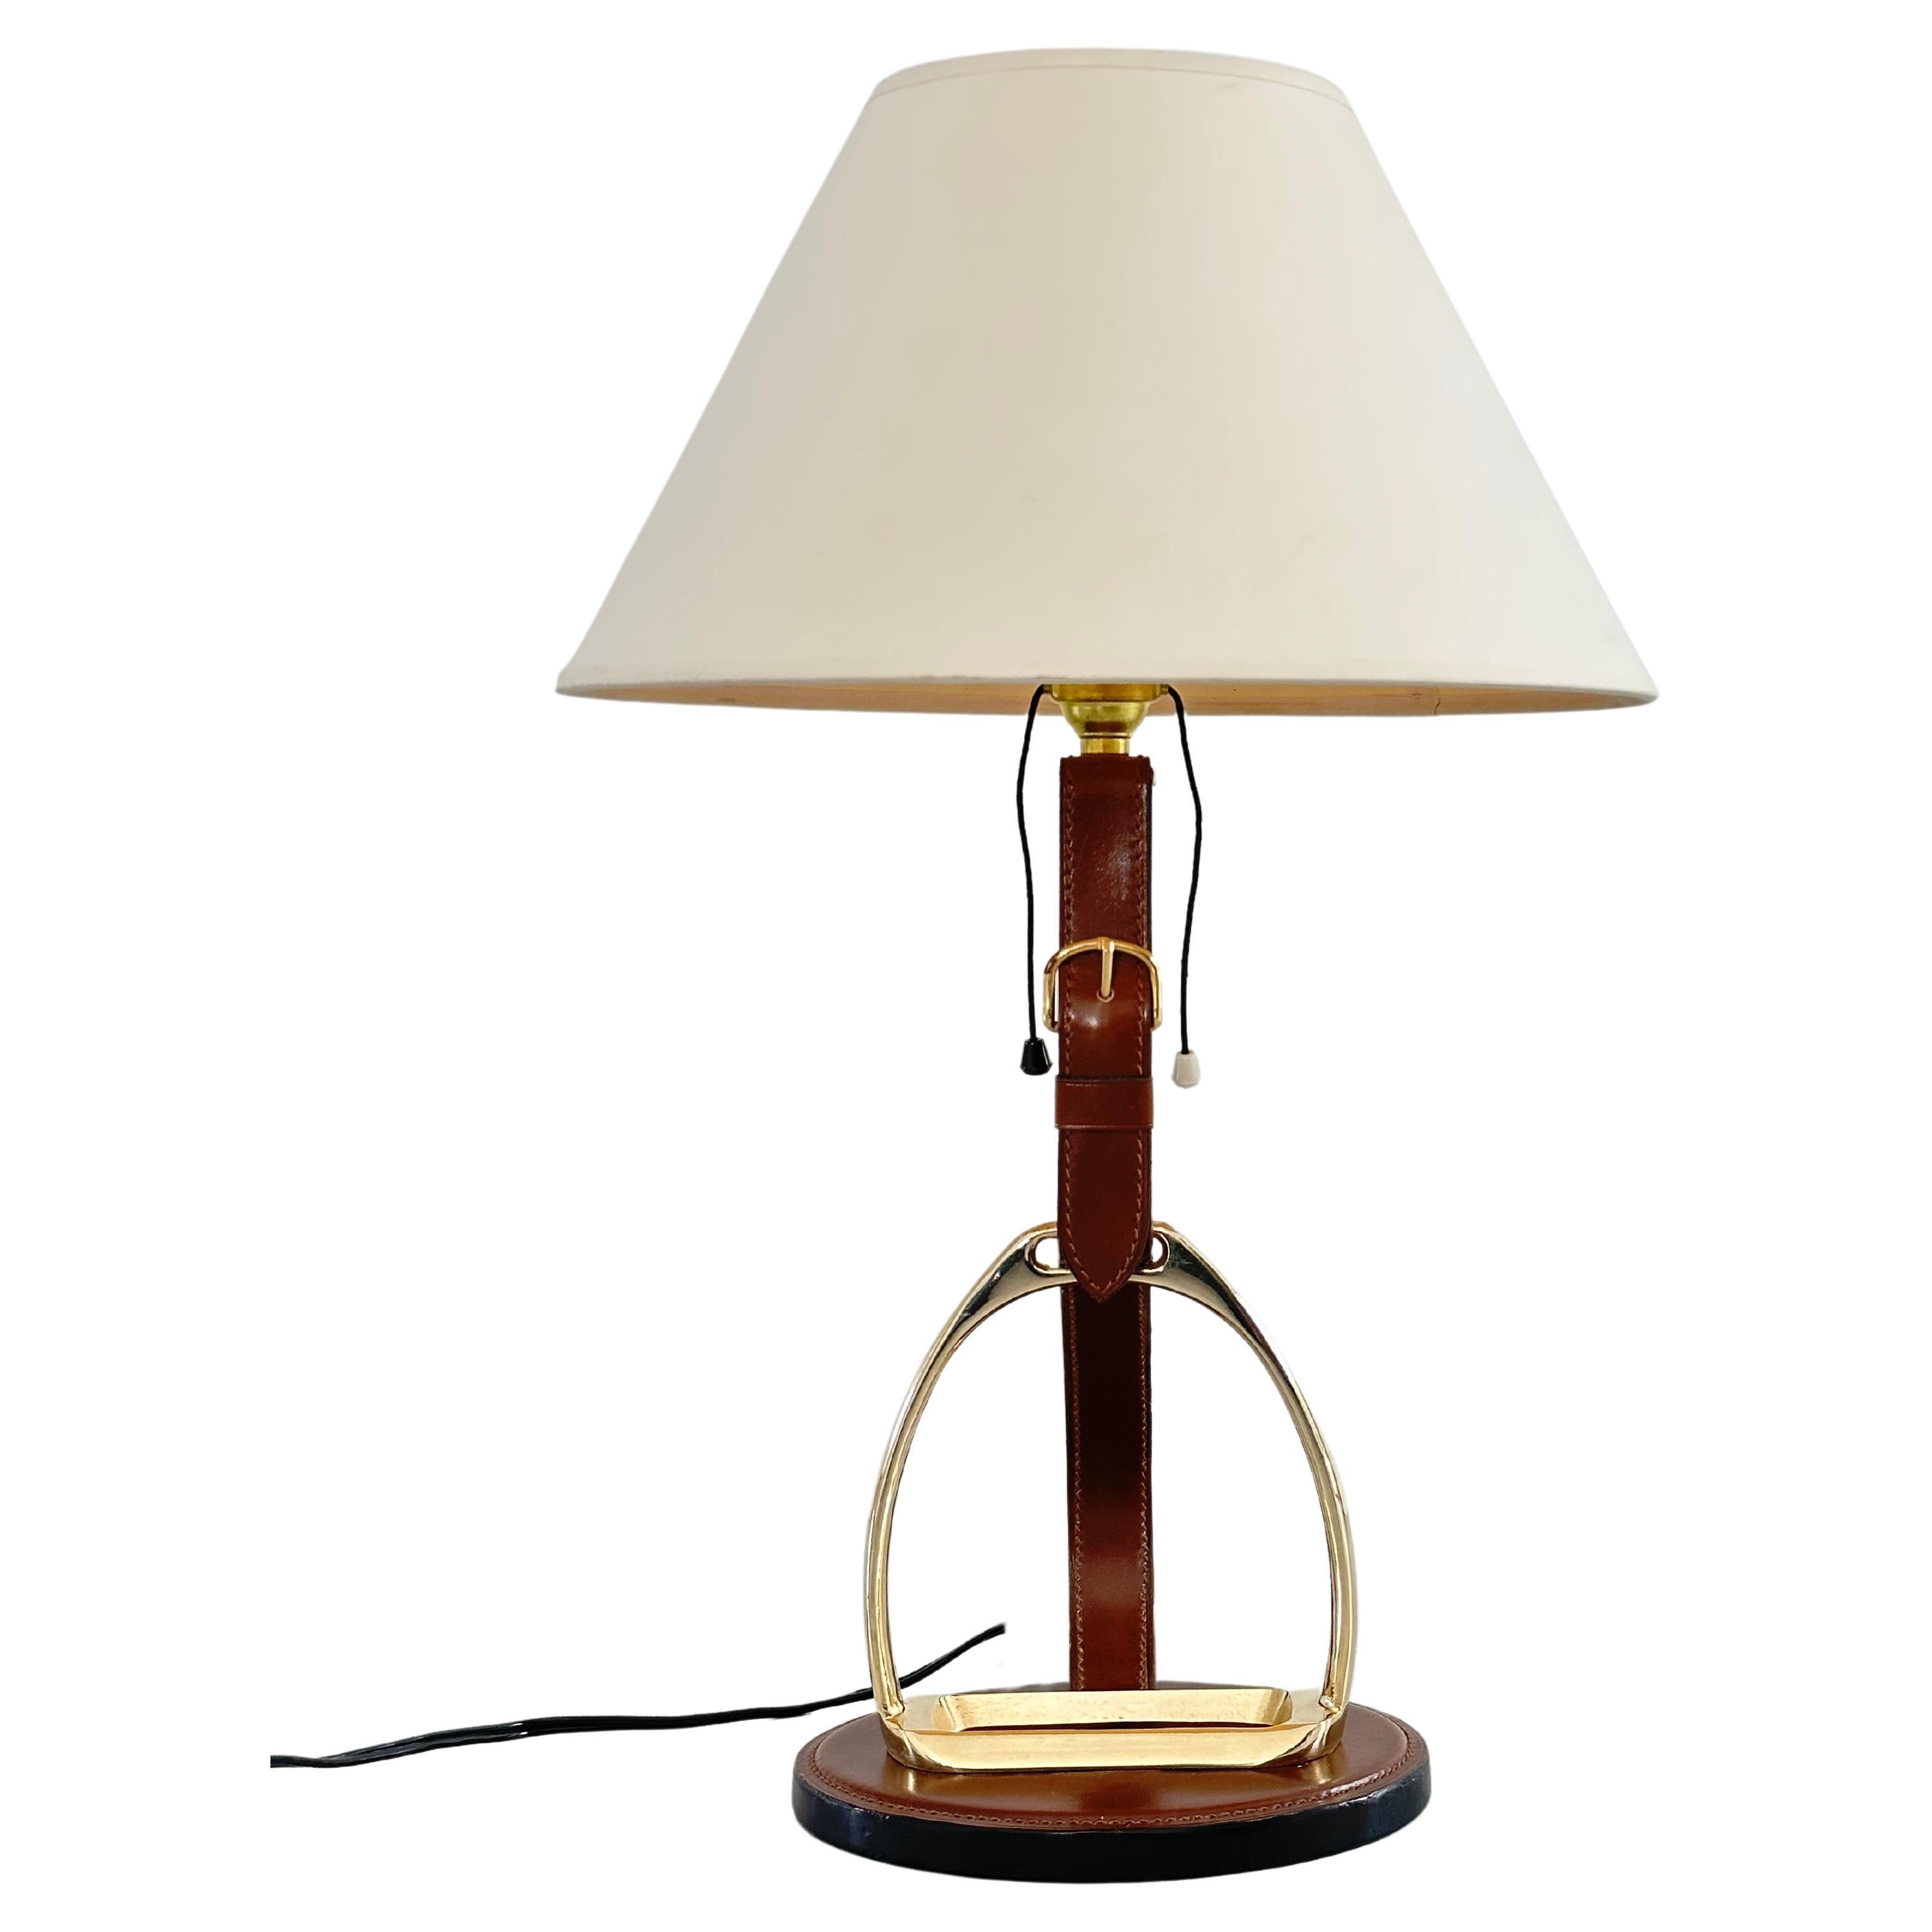 Longchamp design, French Brass & Equestrian Stitched Leather Lamp, 1960s For Sale